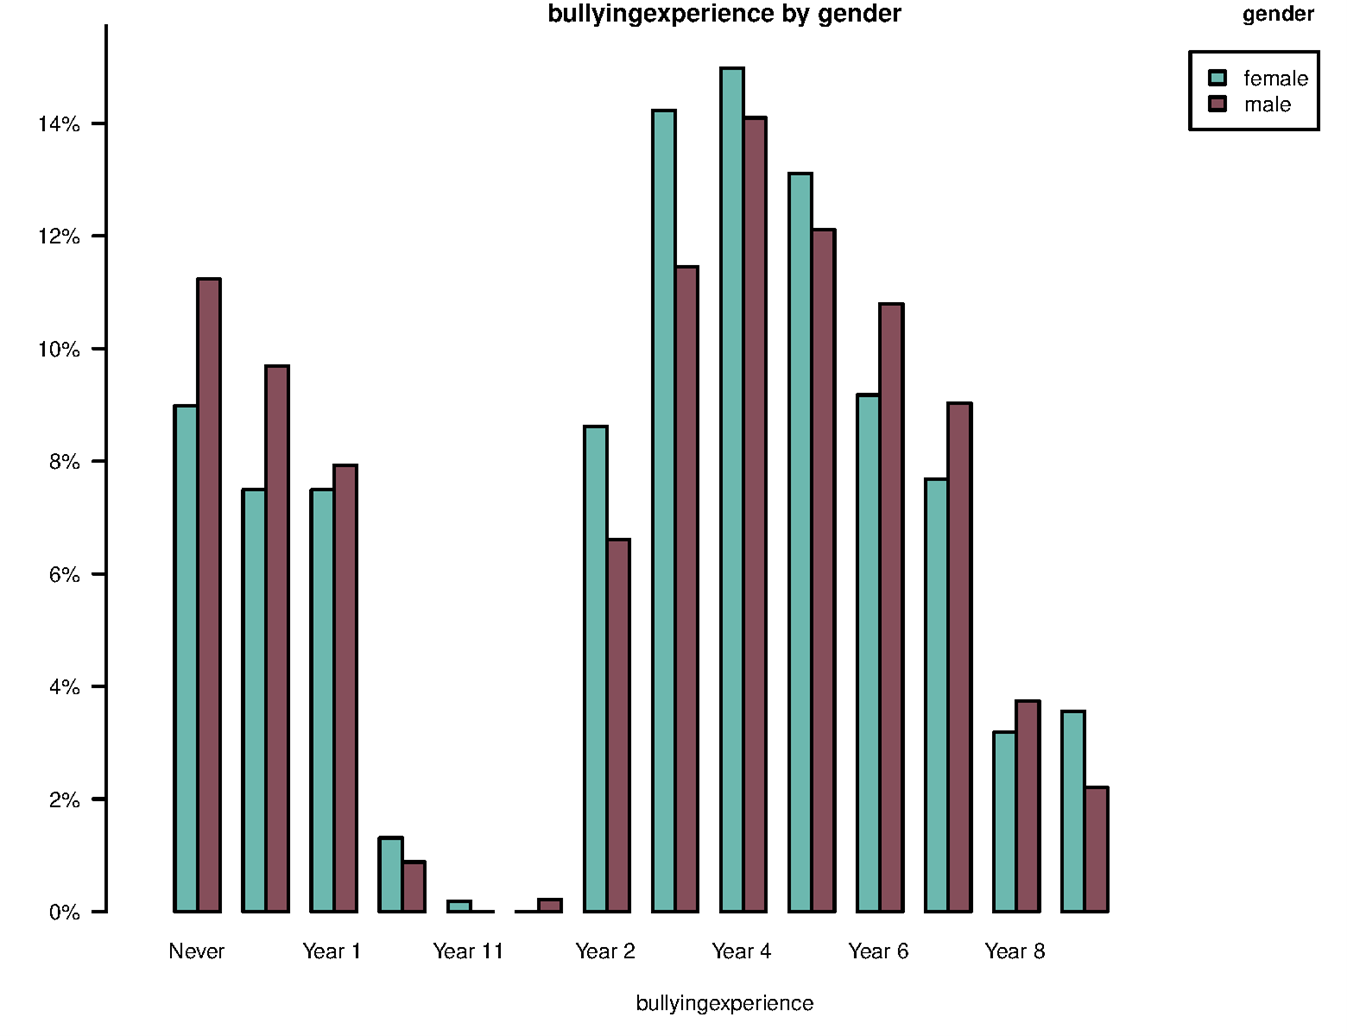 A double bar graph comparing bullying experience by gender.